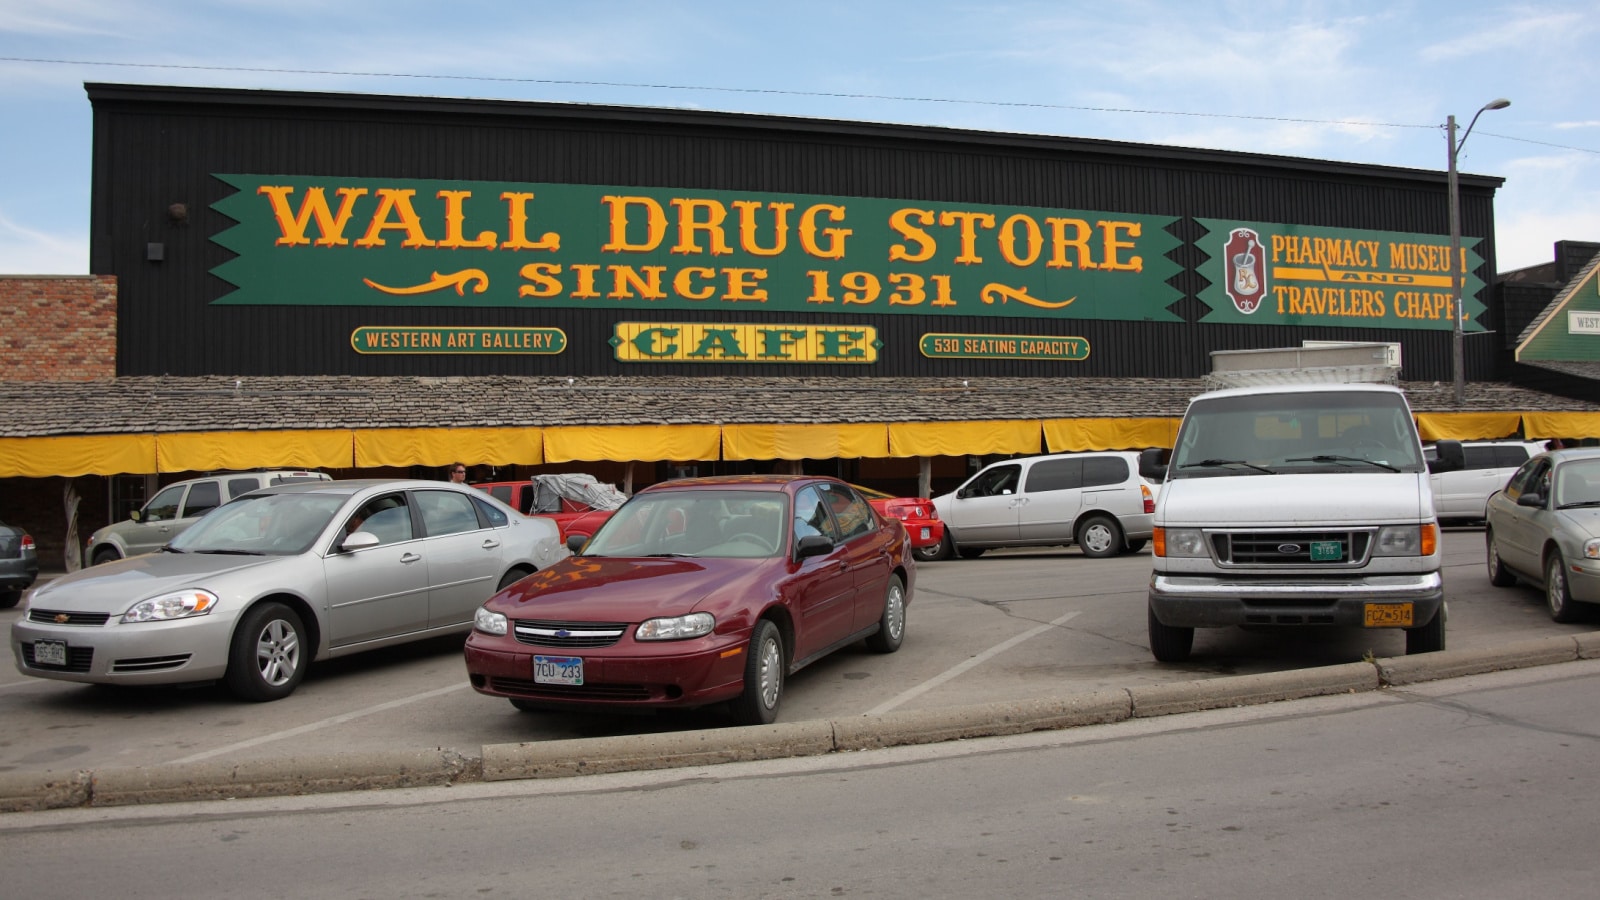 WALL, SOUTH DAKOTA - SEPTEMBER 26: Famous Wall Drug Store on September 26, 2008 in Wall, South Dakota. This attractions draws some 2 million tourists a year with its gift shop and restaurants.